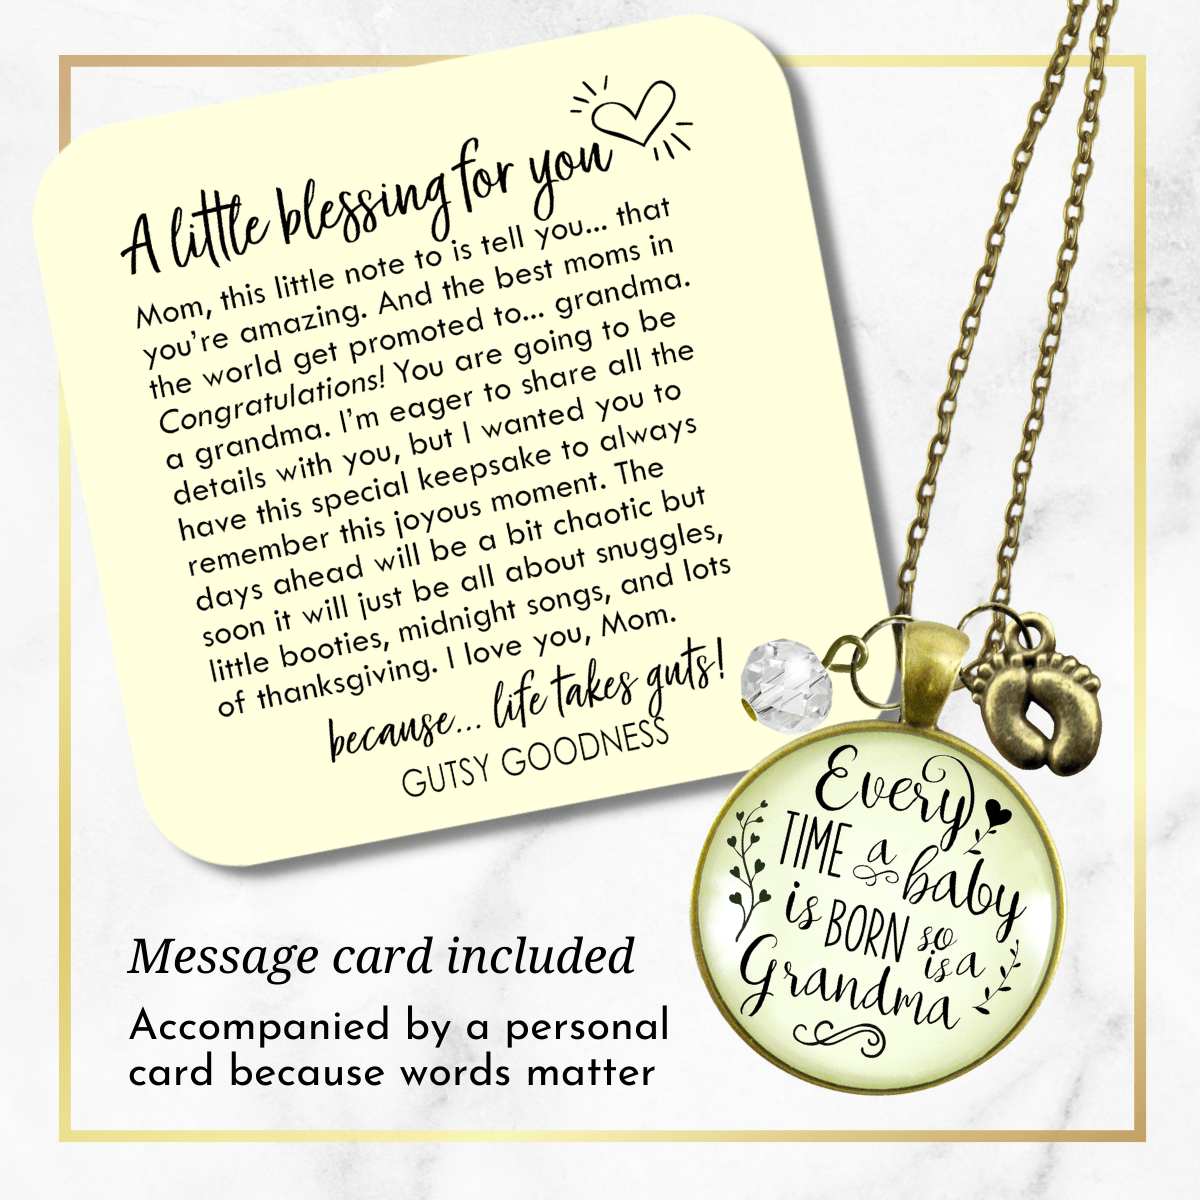 Gutsy Goodness Pregnancy Announcement Grandma Necklace Every Time Reveal Baby Gift - Gutsy Goodness Handmade Jewelry;Pregnancy Announcement Grandma Necklace Every Time Reveal Baby Gift - Gutsy Goodness Handmade Jewelry Gifts